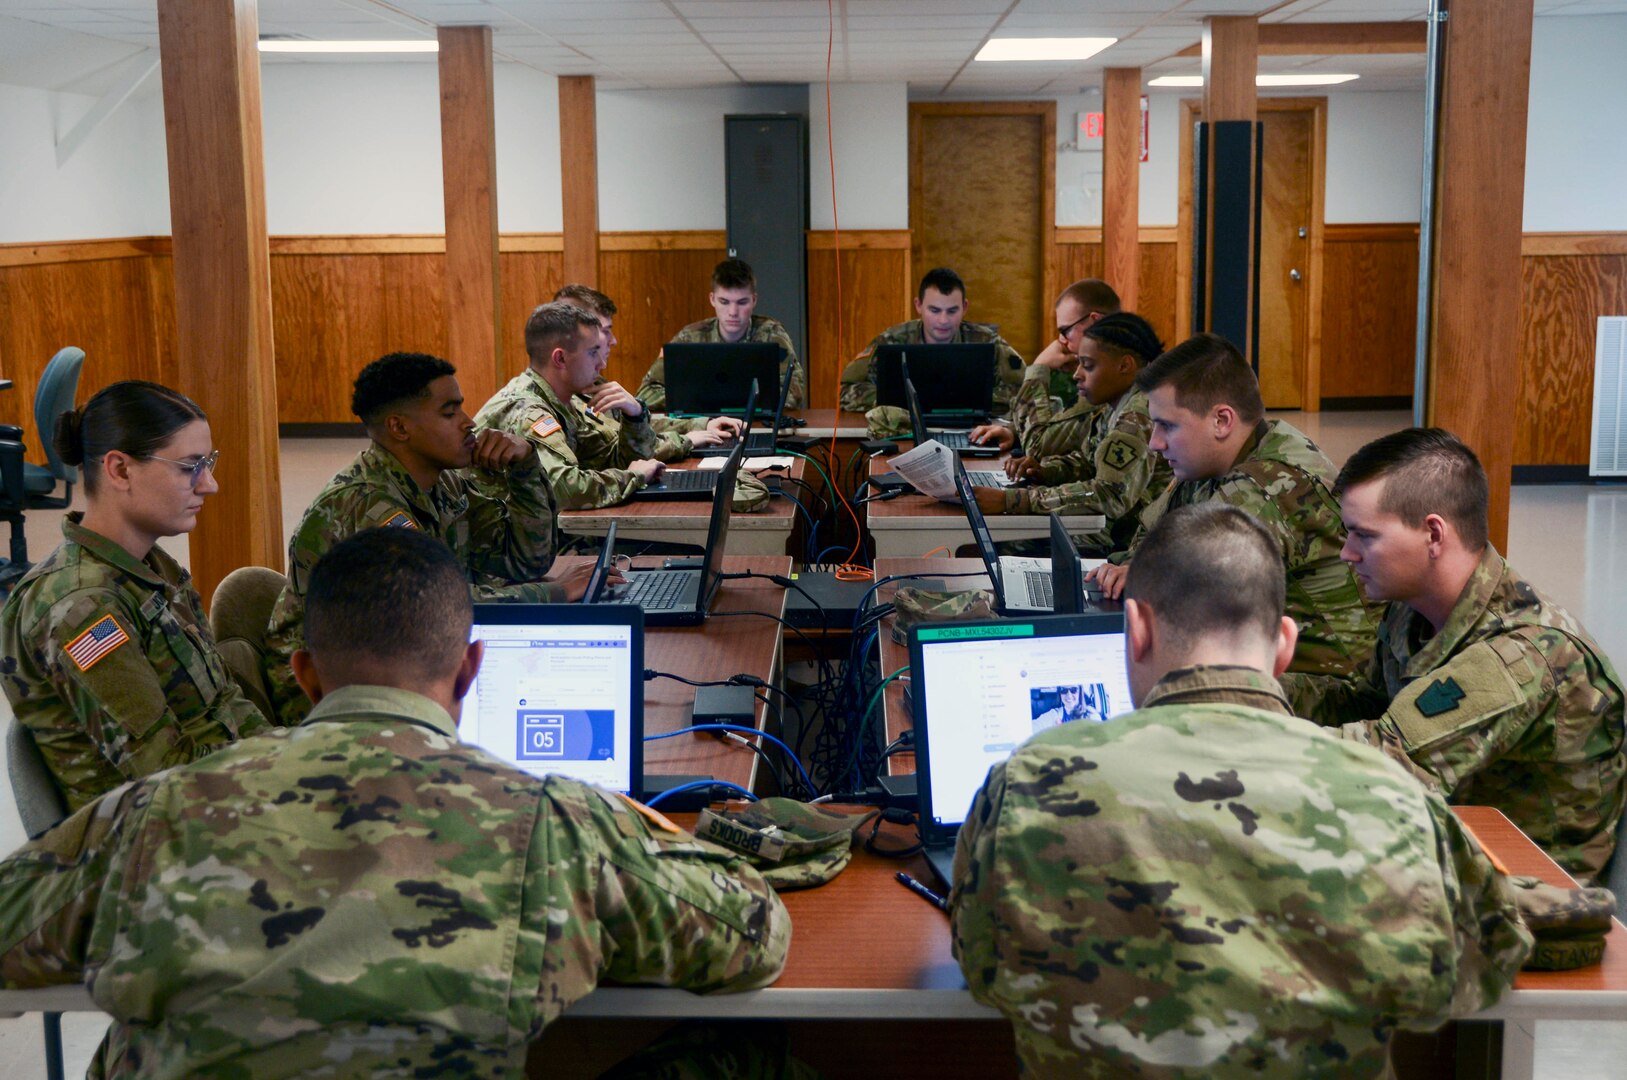 Pennsylvania Army National Guard cyber team members monitor computer networks during elections in the state Nov. 5, 2019. Cyber teams from throughout the National Guard have remained a key part of cyber defense, said Guard officials, and have responded to ransomware attacks in Texas and Louisiana and worked in direct support of U.S. Cyber Command.